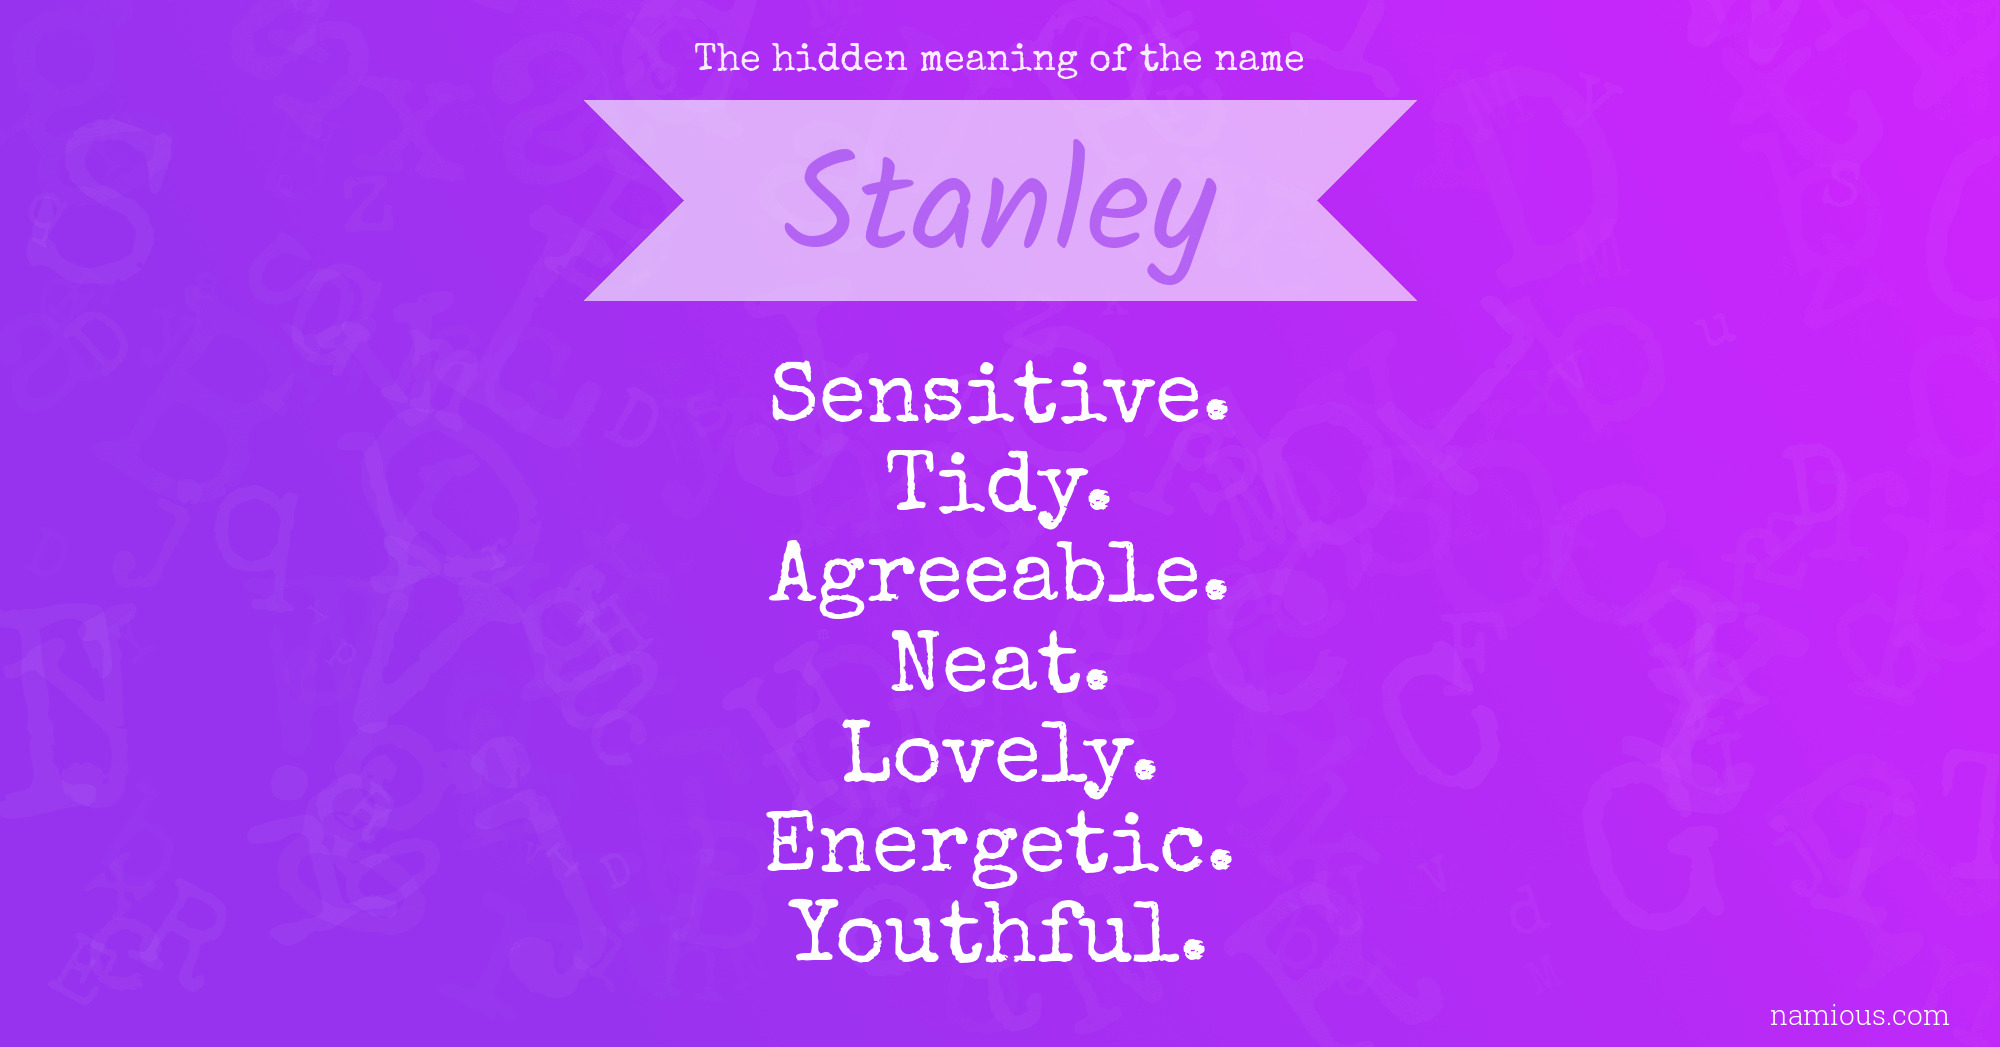 The hidden meaning of the name Stanley